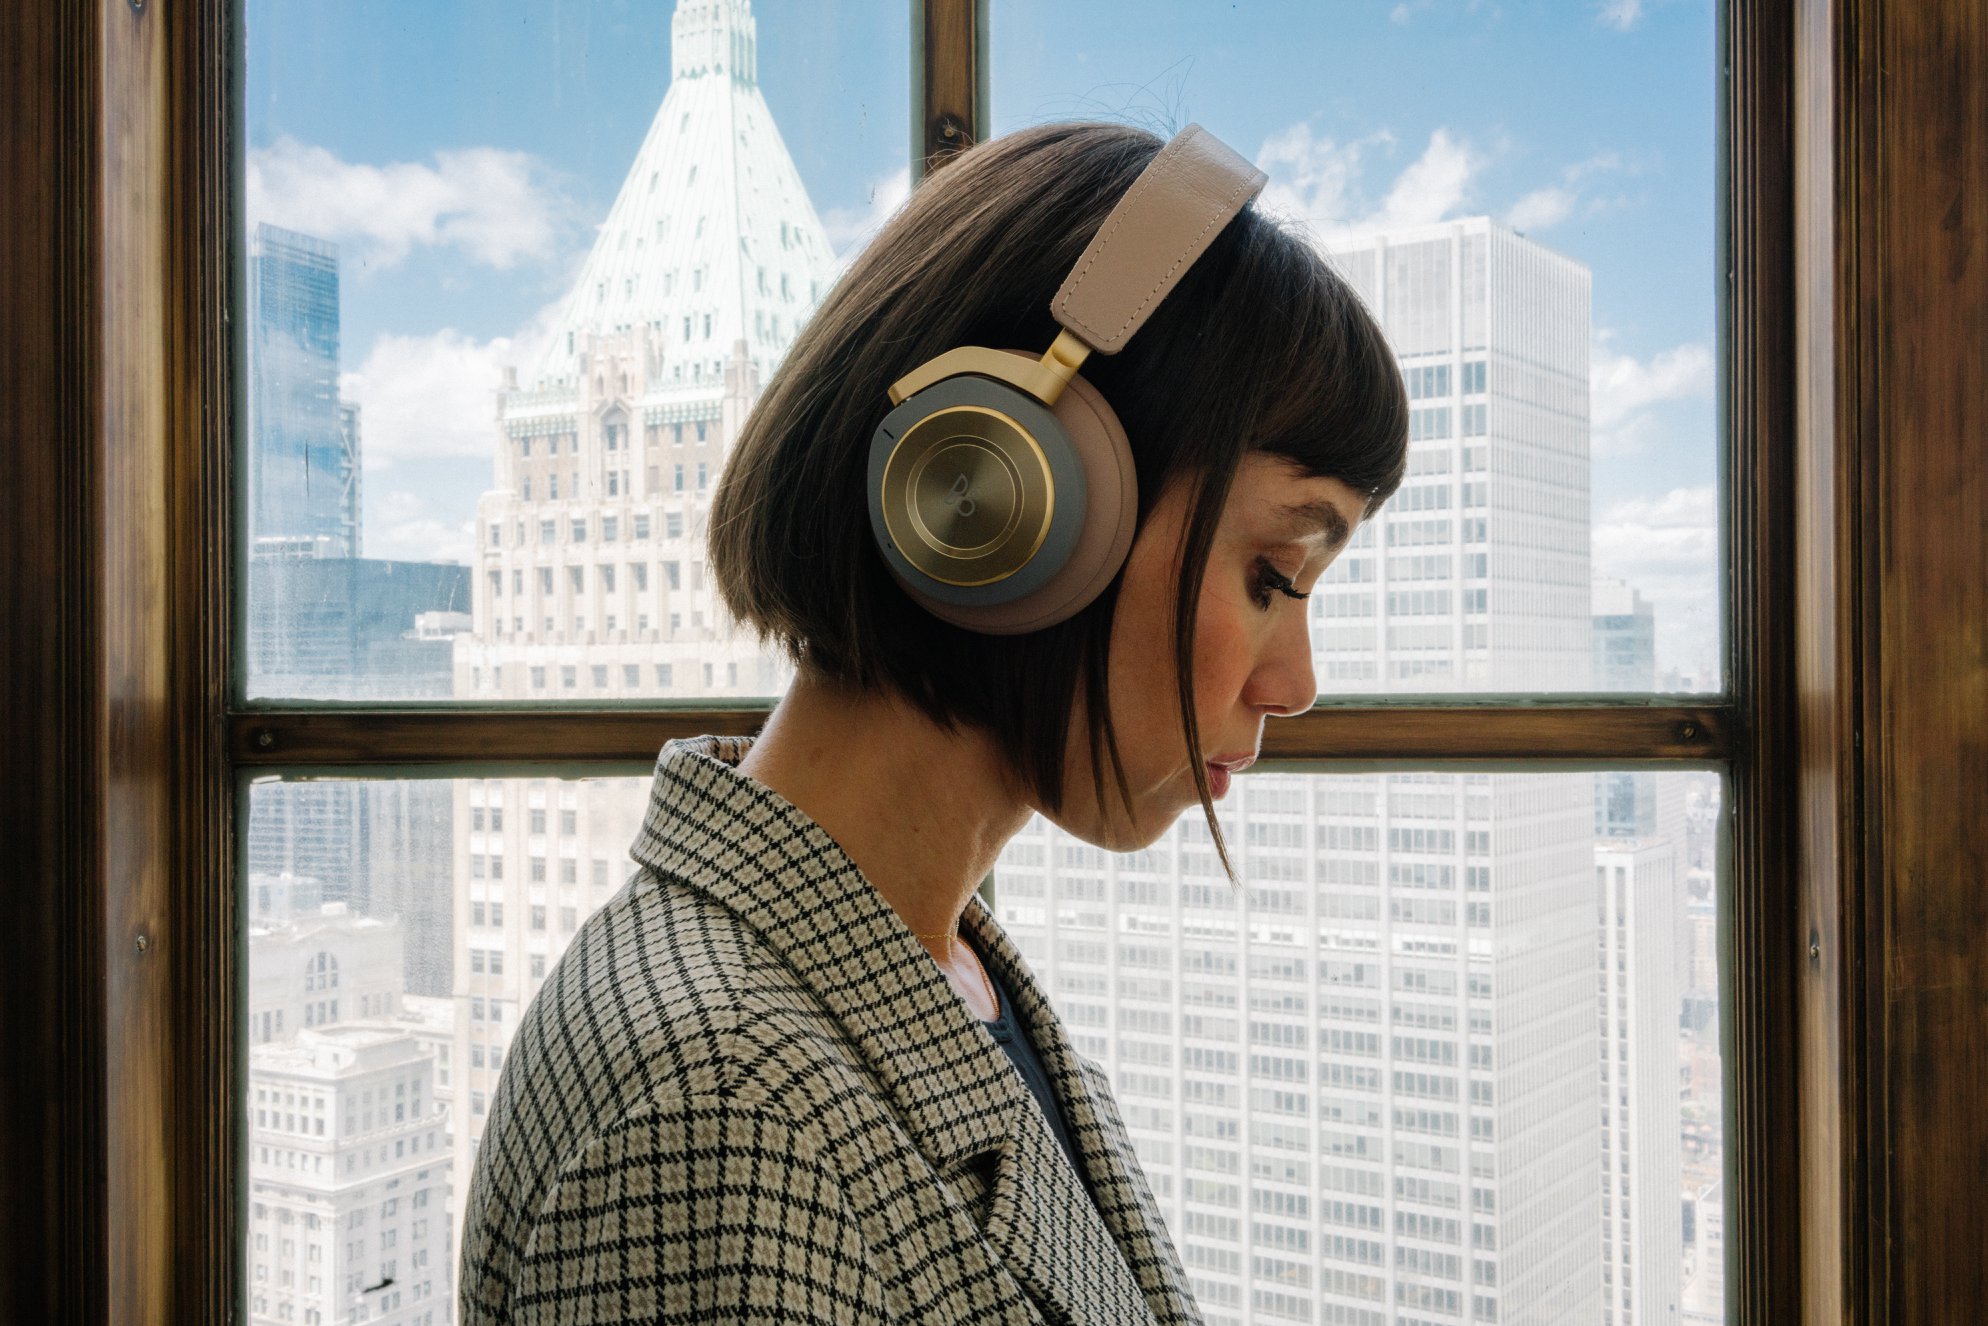 Upgrade your journey this summer with the new Beoplay H9 headphones. festivalwalk